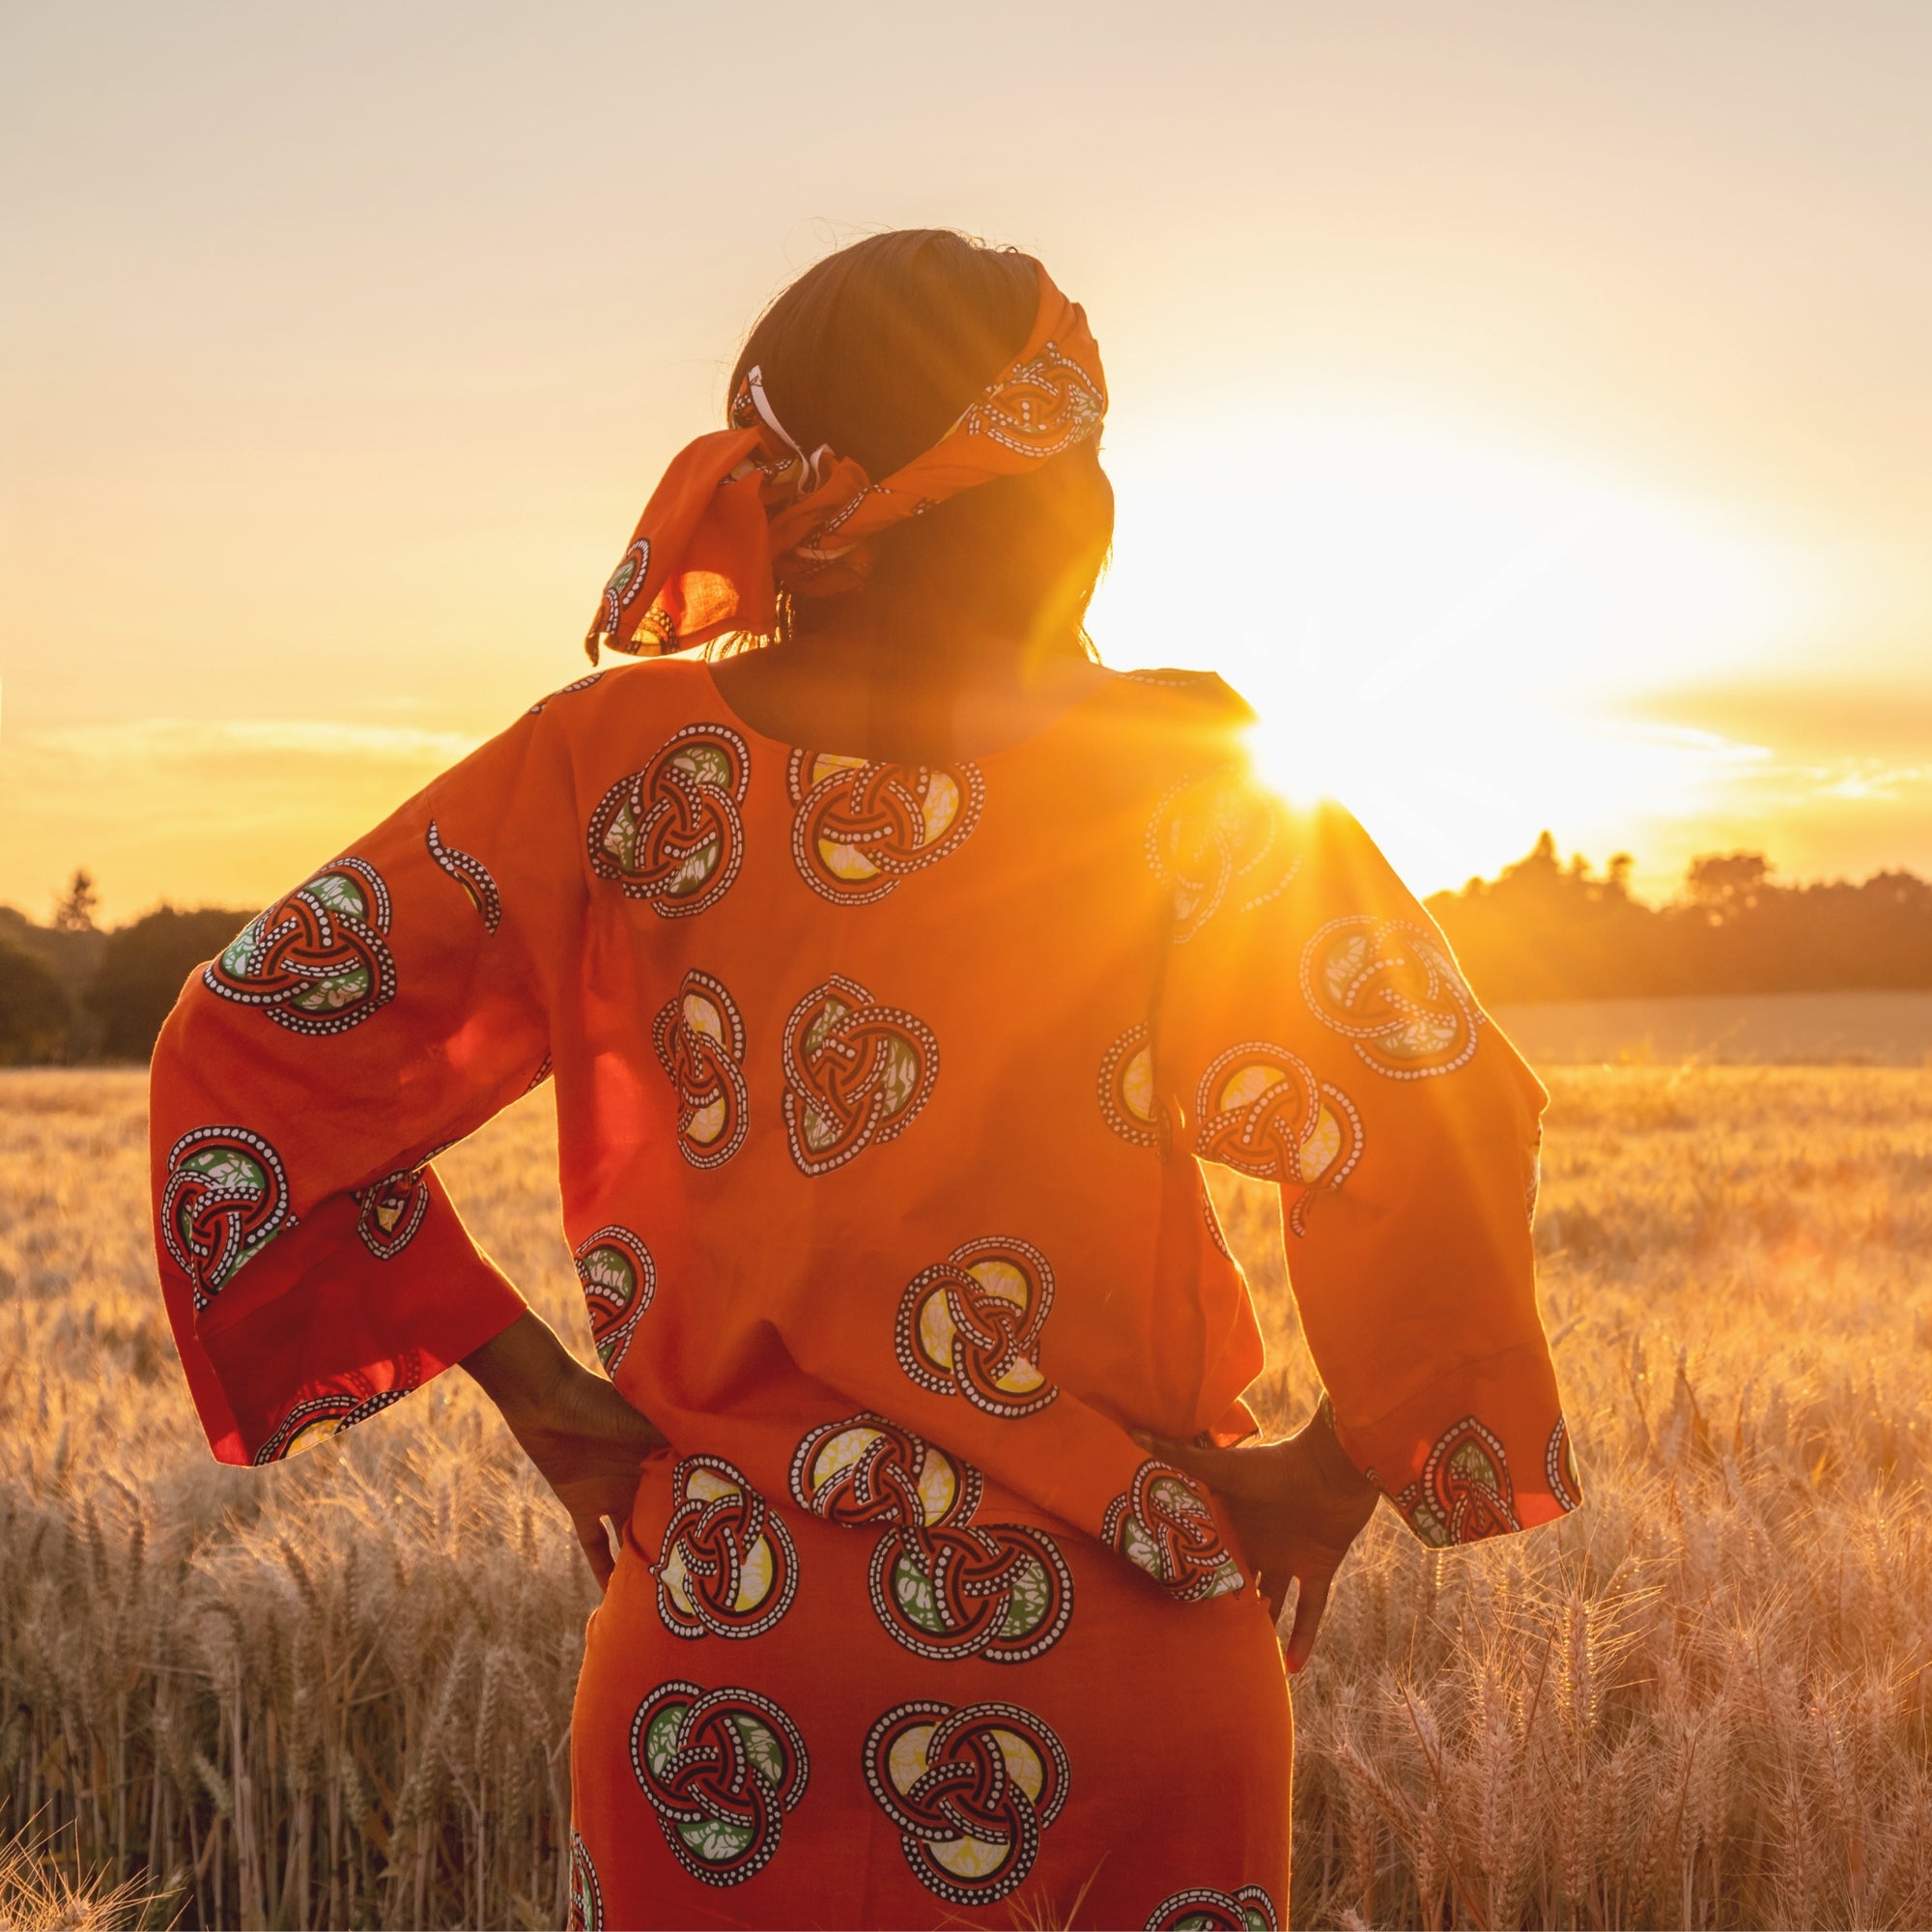 African woman in a crop field at sunset, symbolizing &Better's dedication to eco-friendly products, organic ingredients, and community support.